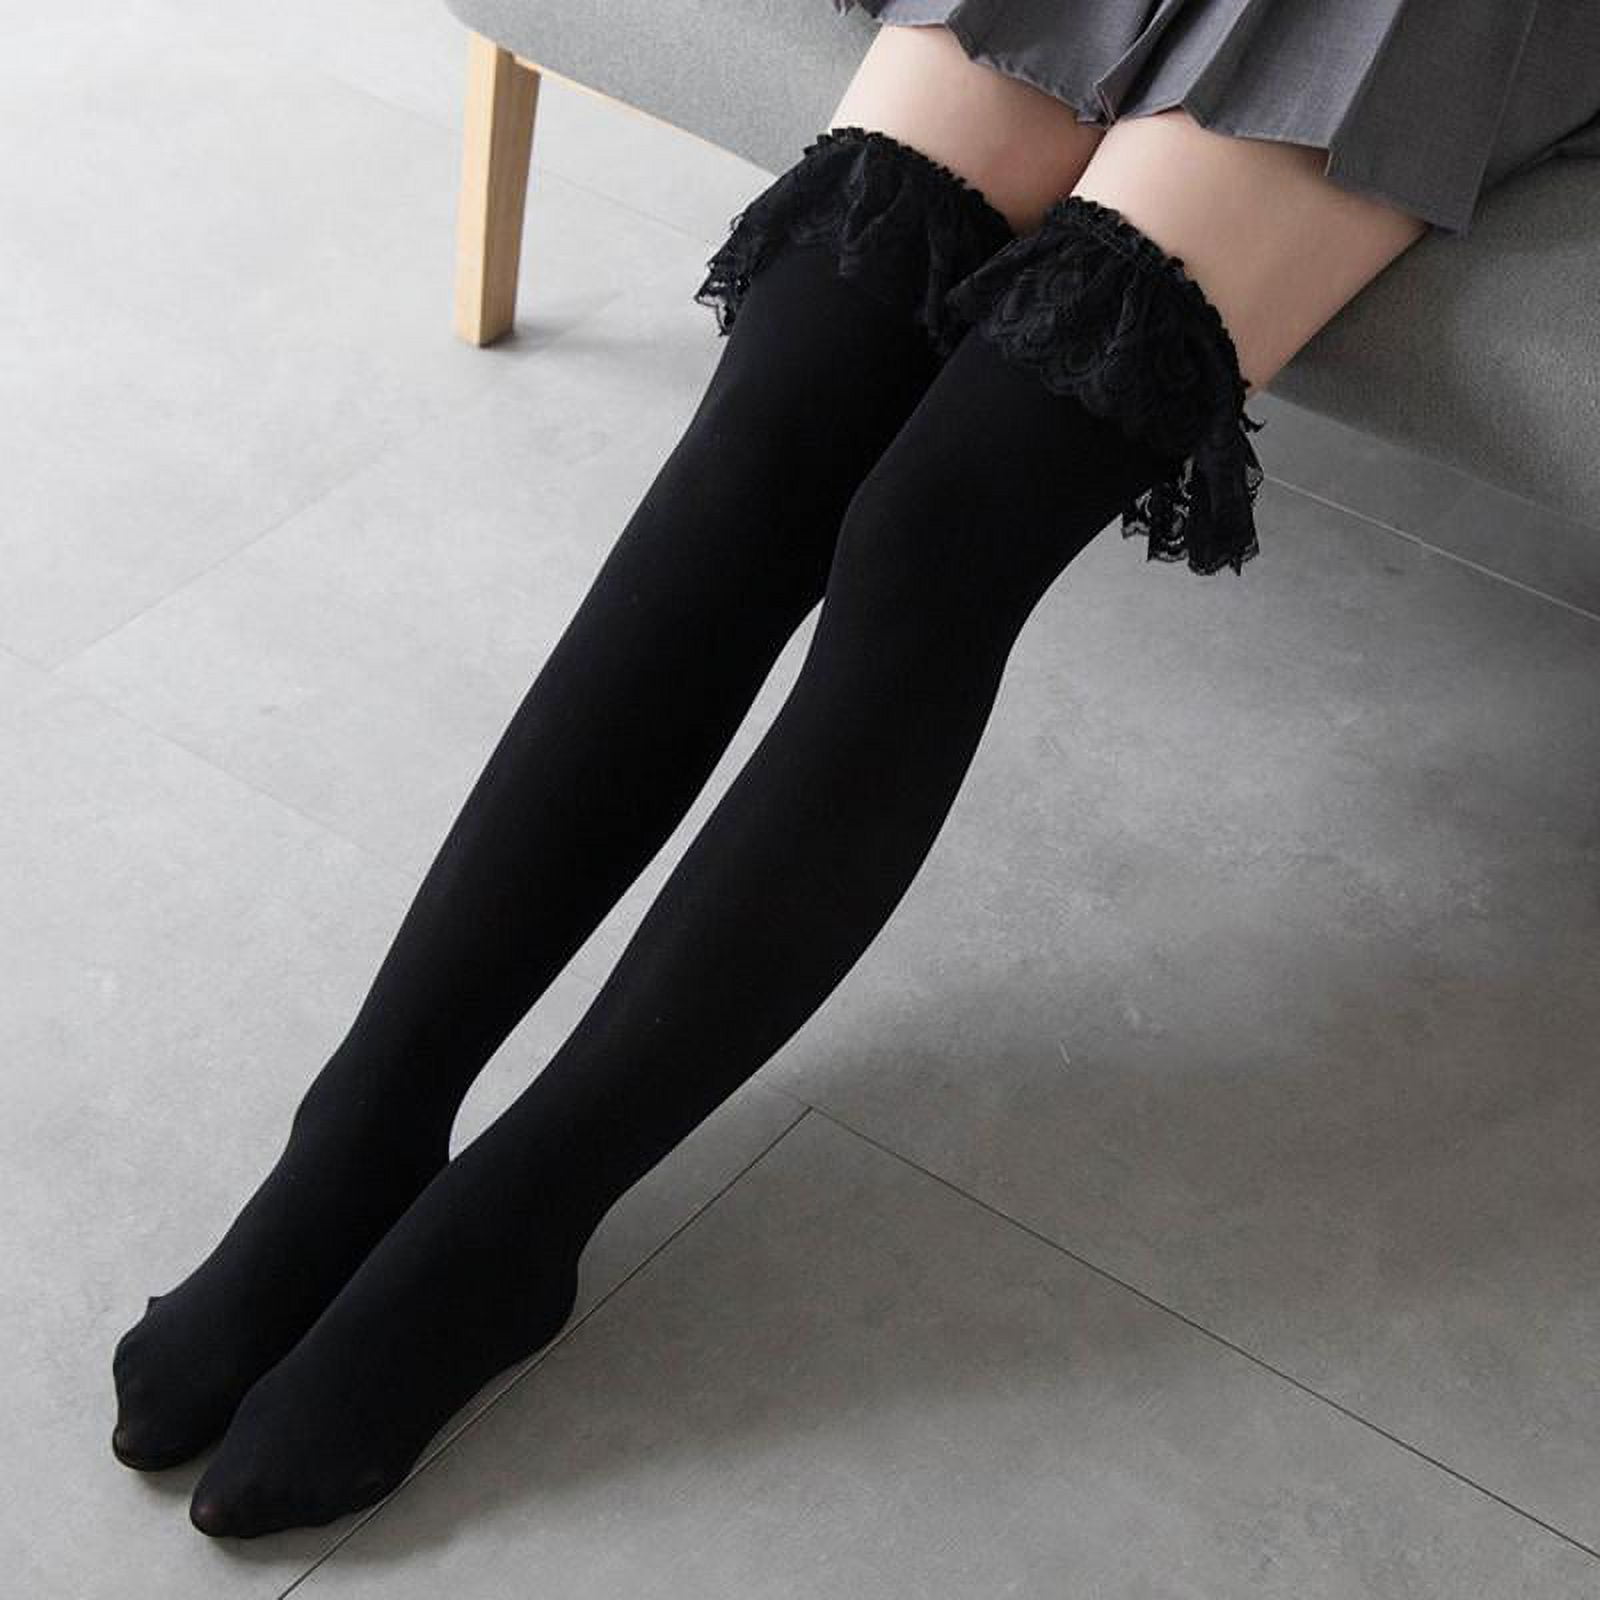 Sexy Solid Color Over The Knee Long Socks Women Thigh High Stockings  Japanese Lolita Ruffles Lace Anime Cosplay Hosiery 